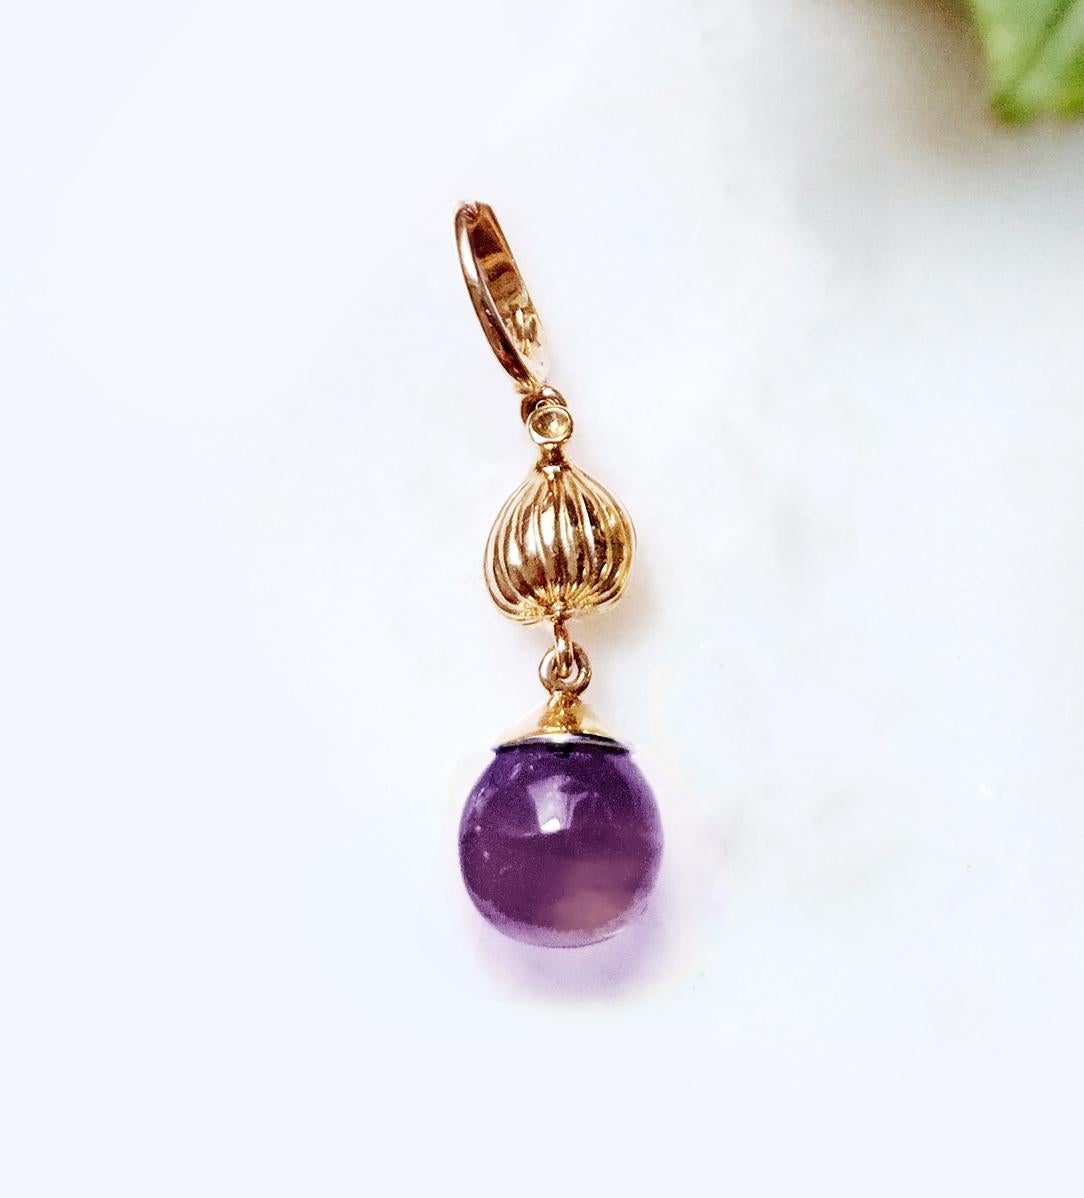 Eighteen Karat Rose Gold Drop Pendant Necklace with Amethyst by the Artist In New Condition For Sale In Berlin, DE